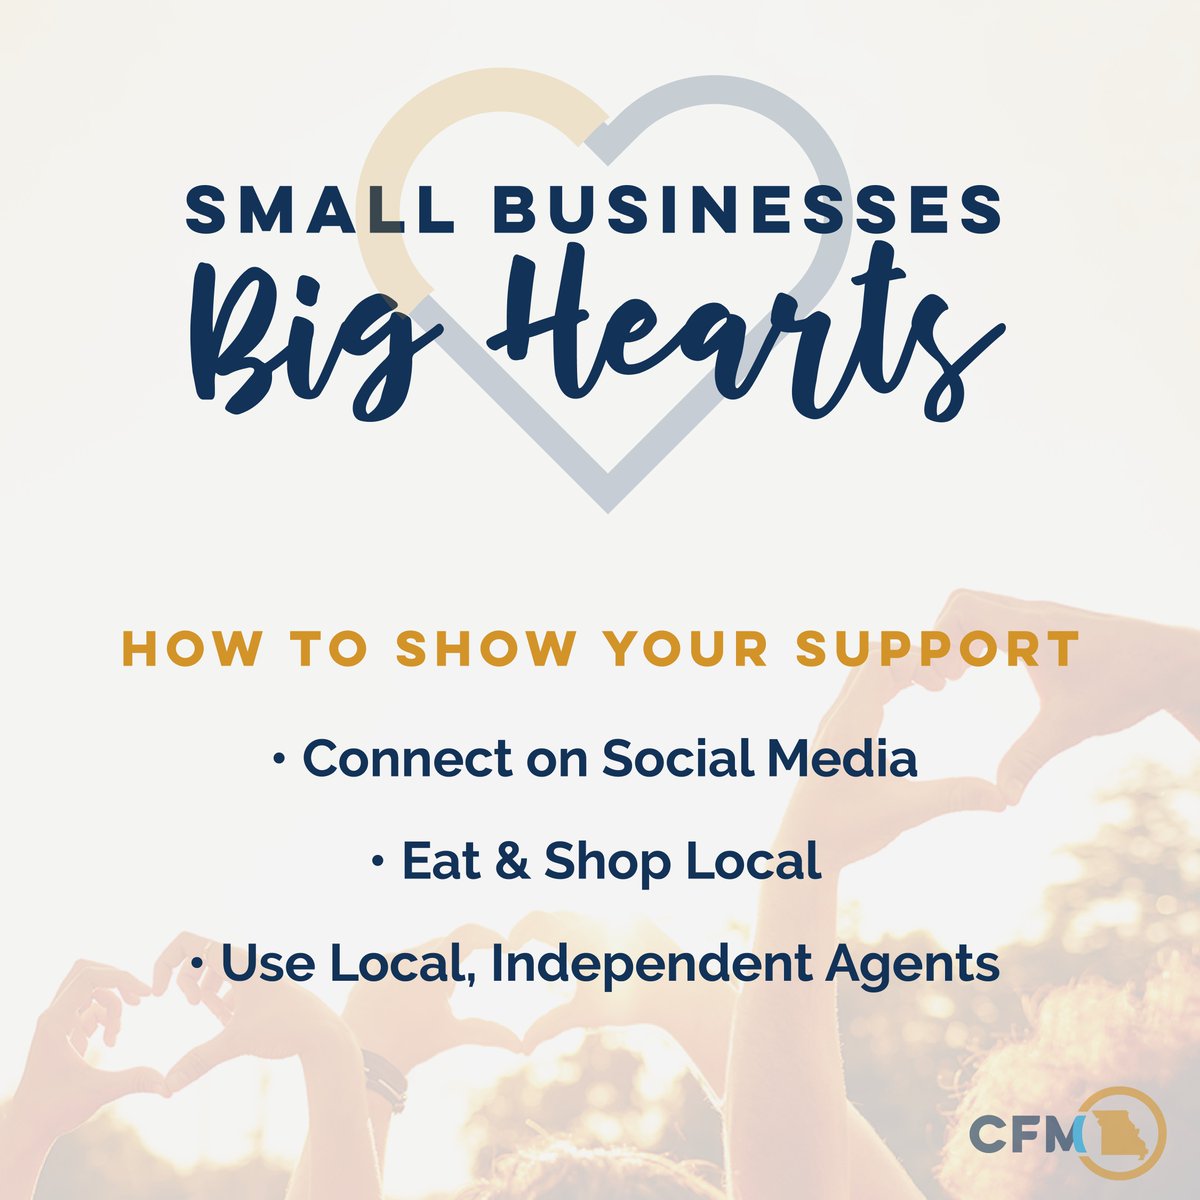 🌟Happy #NationalSmallBusinessWeek!🌟 These small business owners pour their hearts & souls into their businesses every single day, & your support means the world to them. Here are some simple yet impactful ways you can show your love & appreciation. #SupportLocal #CFMInsurance